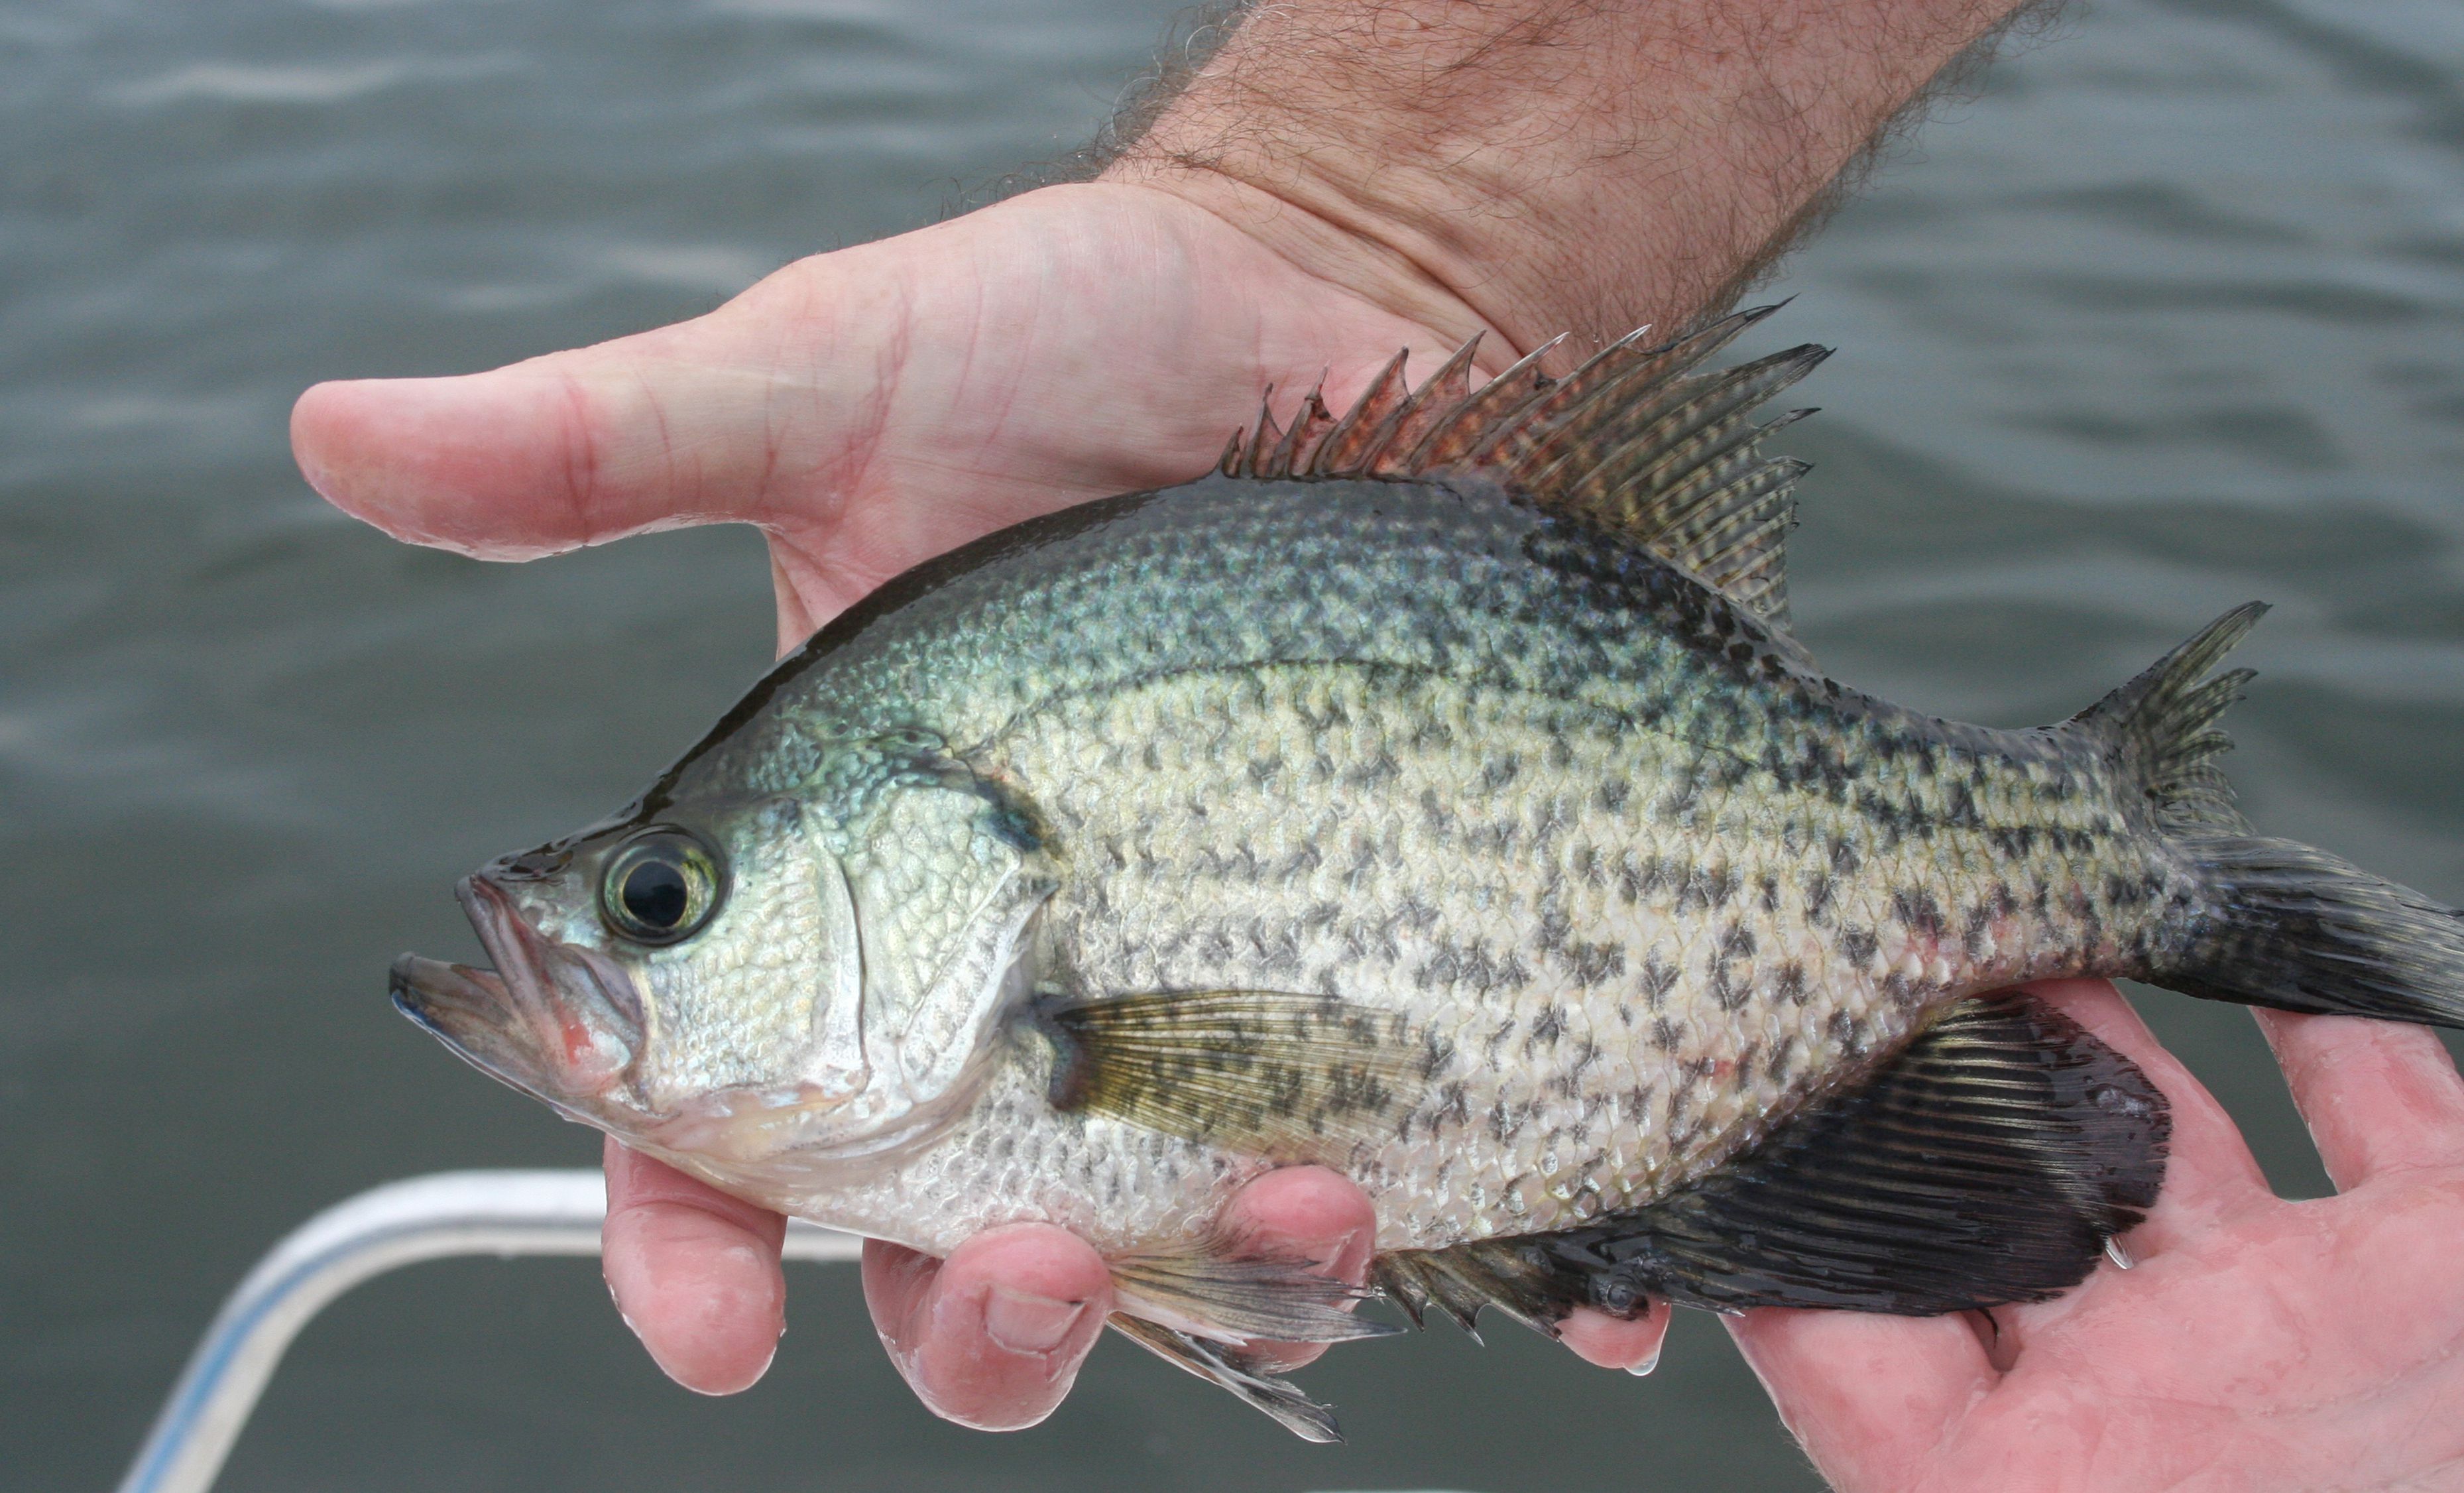 A Profile of the Crappie as a Freshwater Gamefish